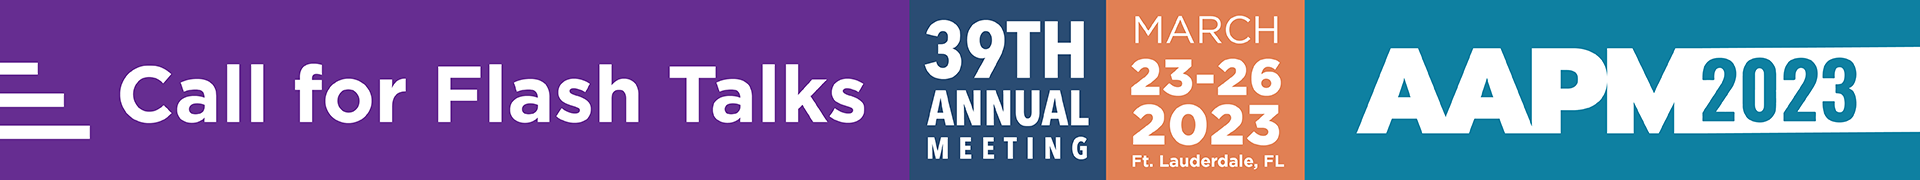 2023 Annual Meeting Event Banner